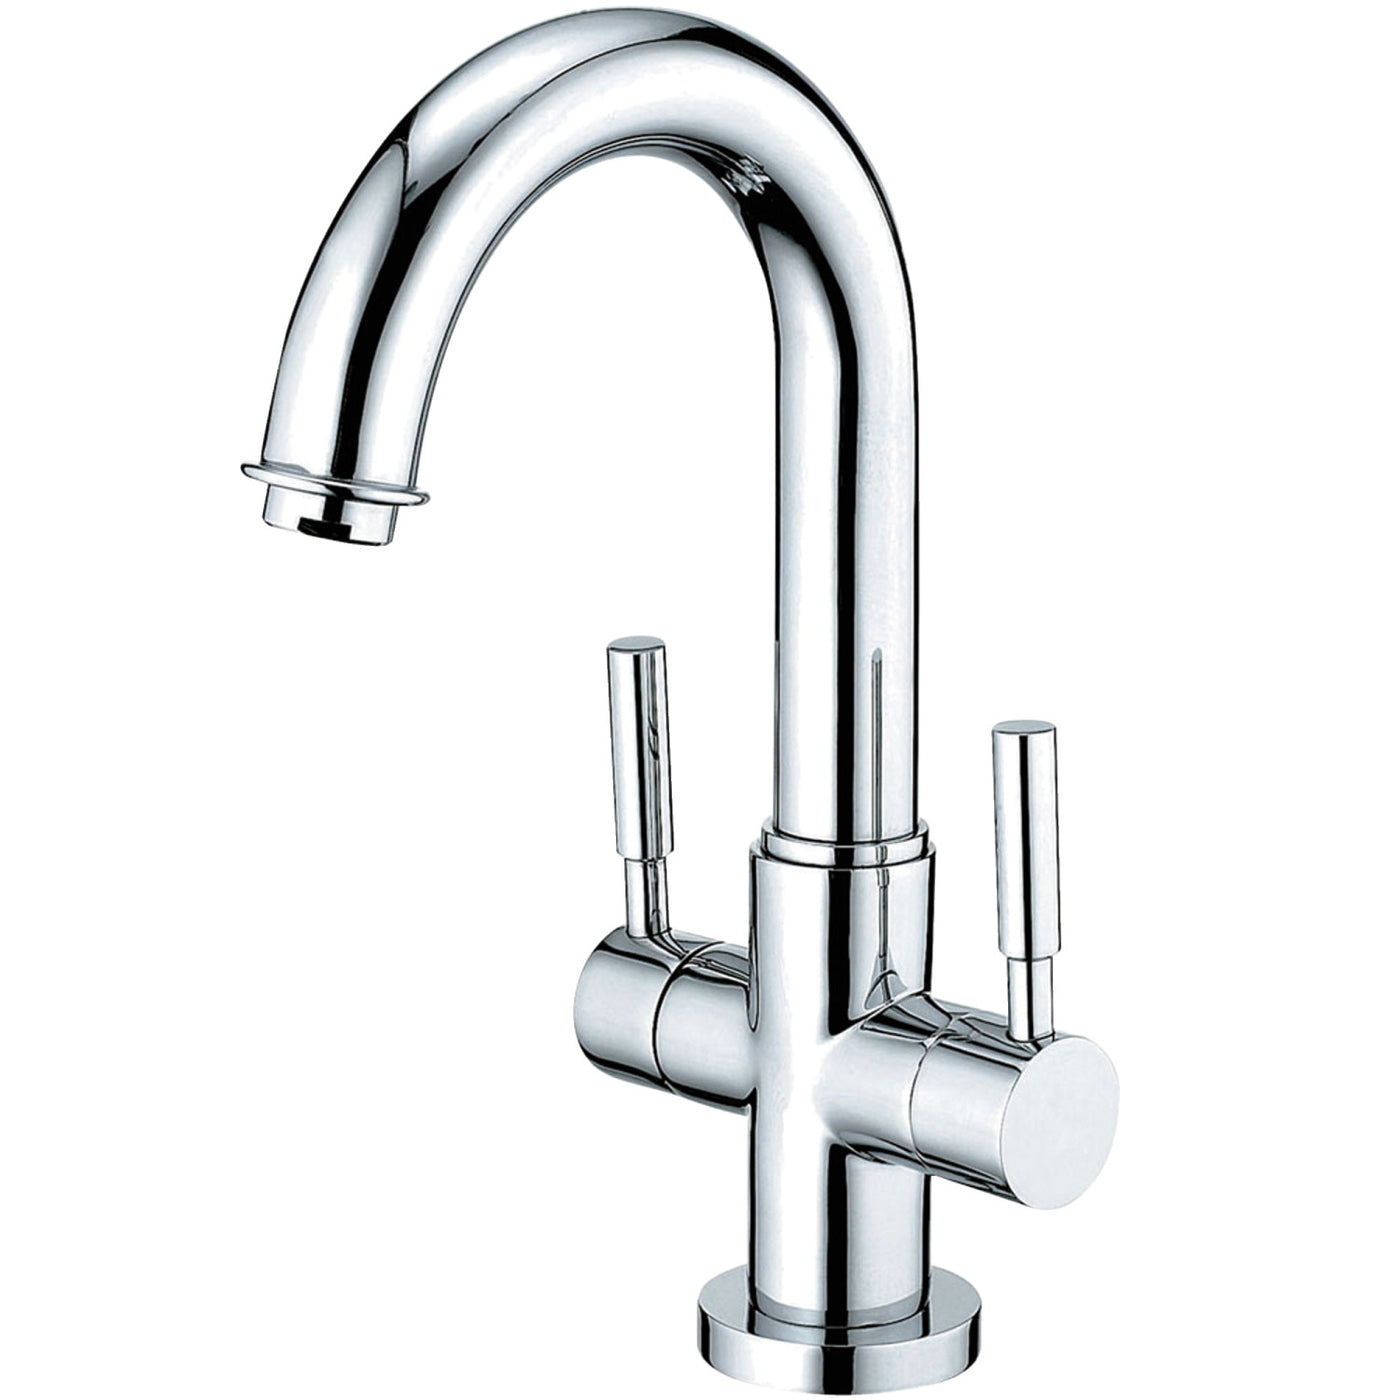 Elements of Design ES8451DL Two-Handle Bathroom Faucet with Push Pop-Up, Polished Chrome